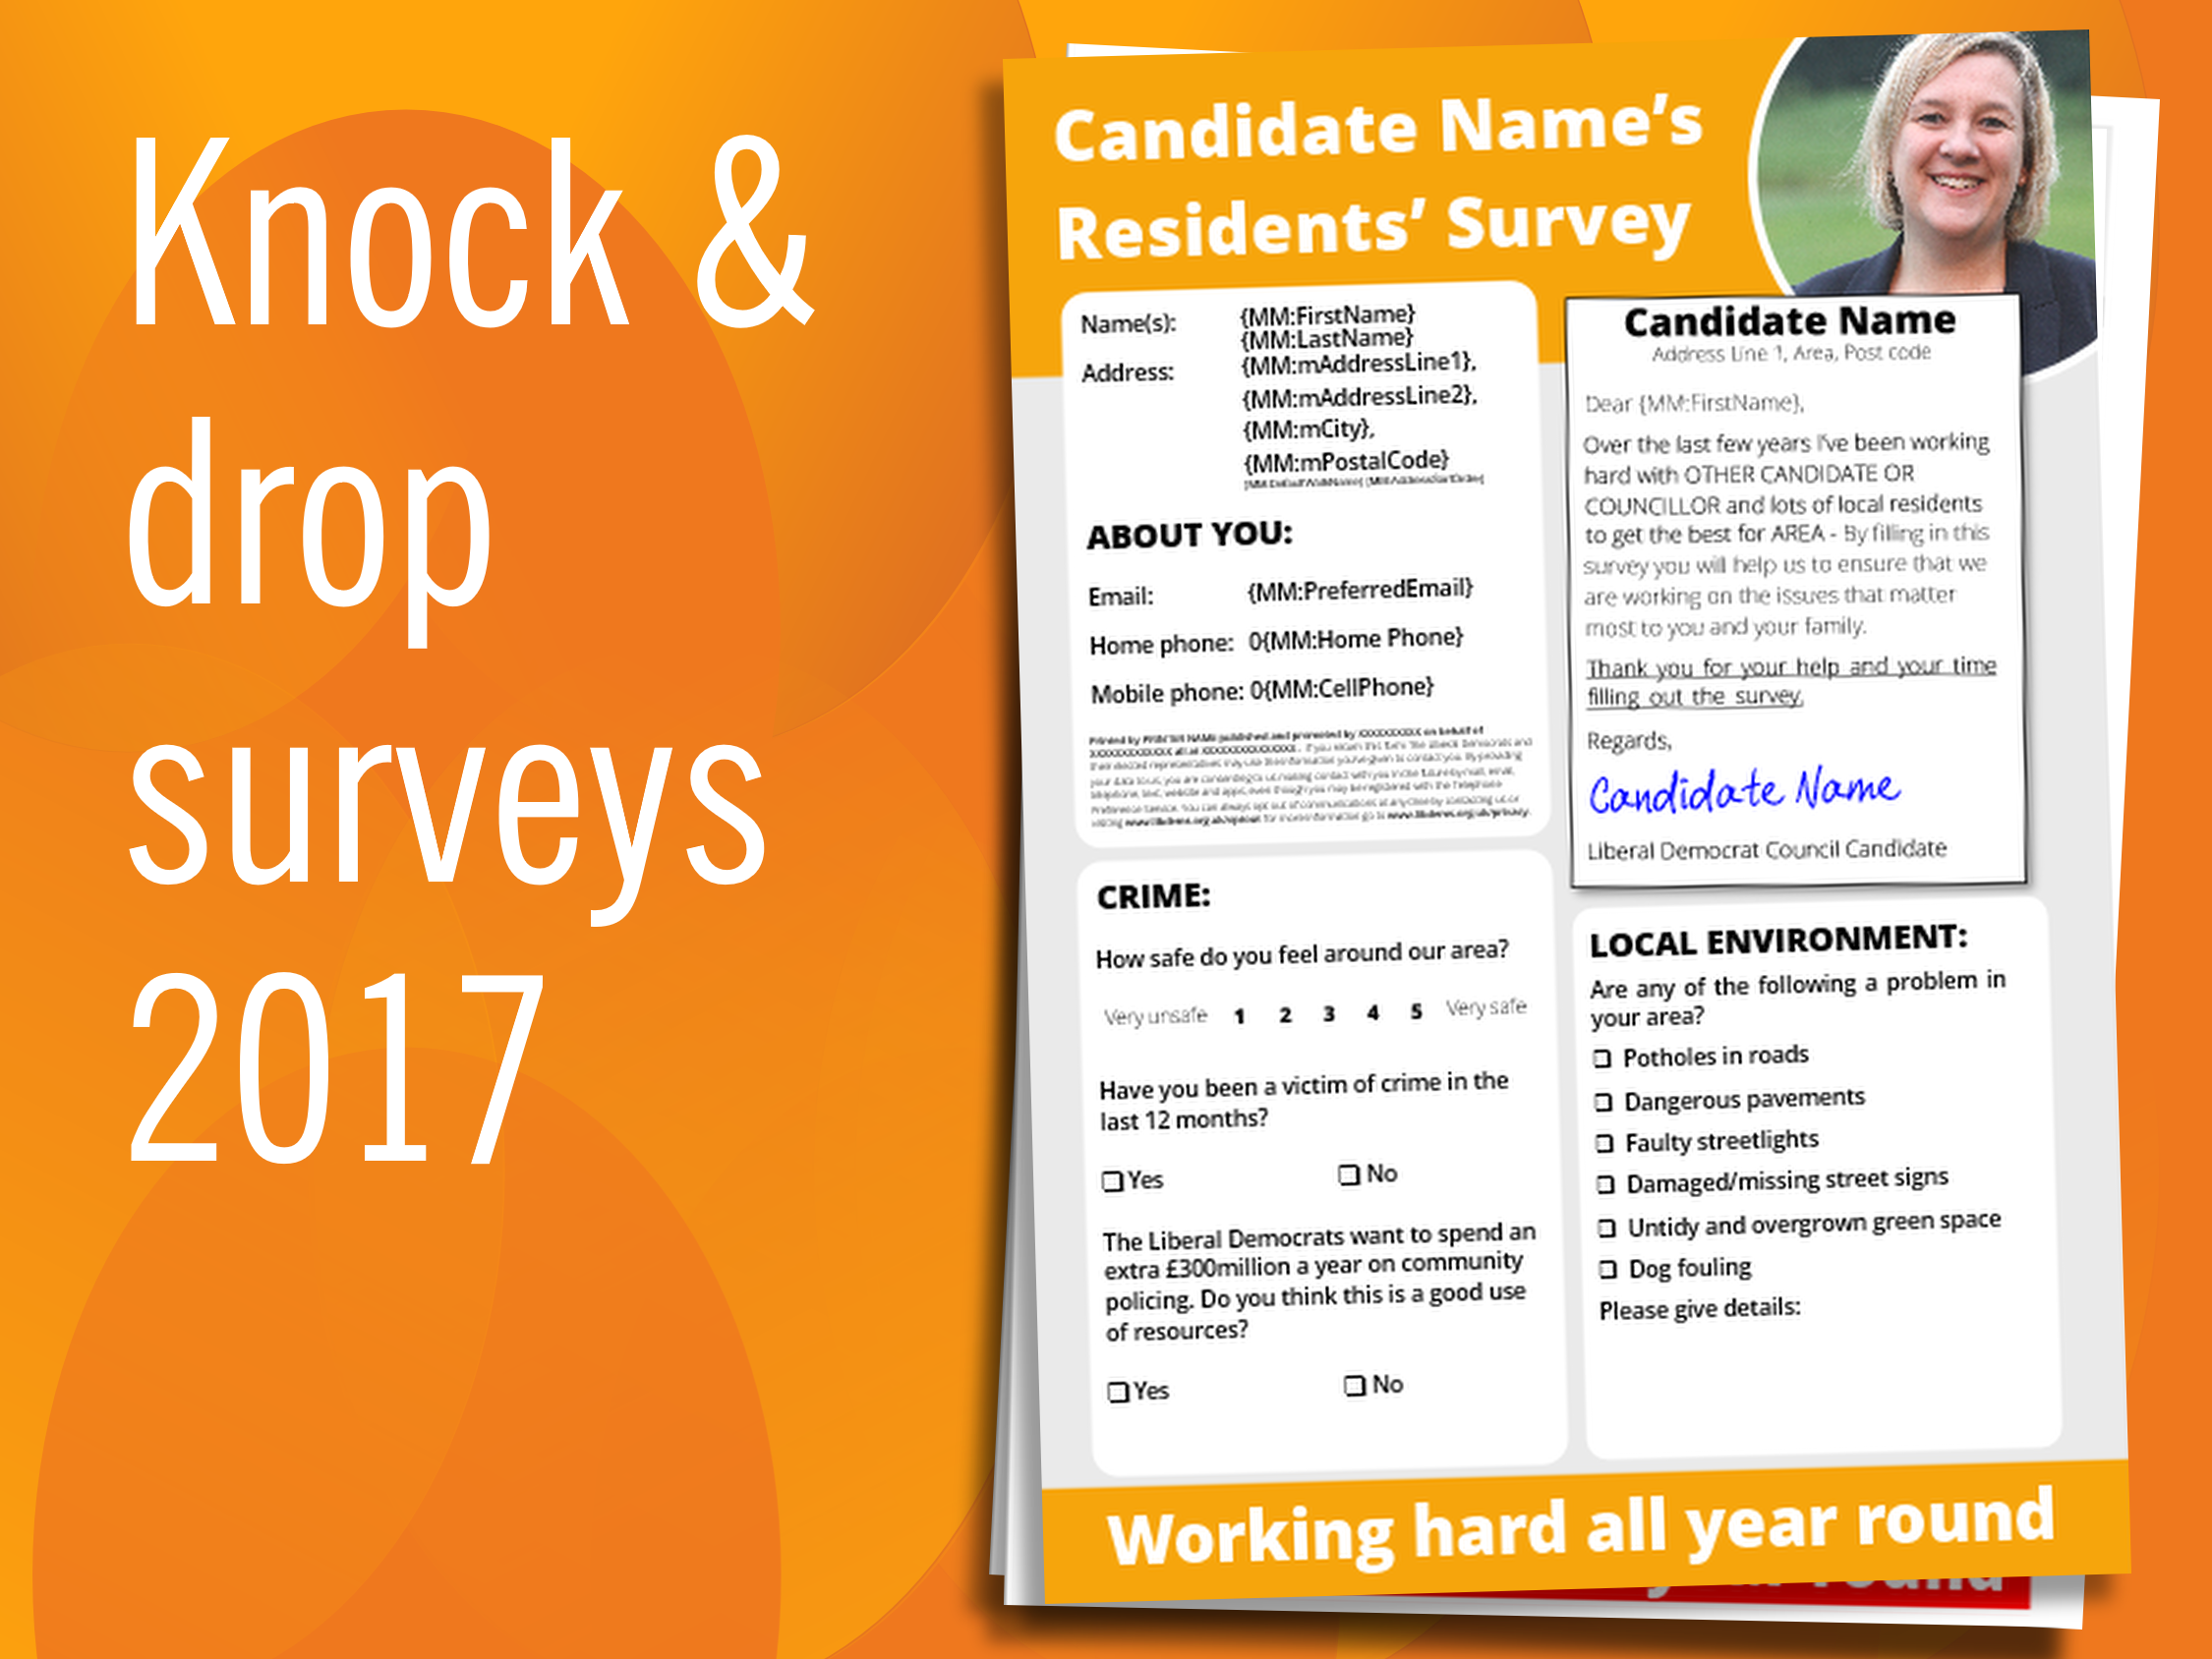 RESOURCES: Knock and drop survey templates